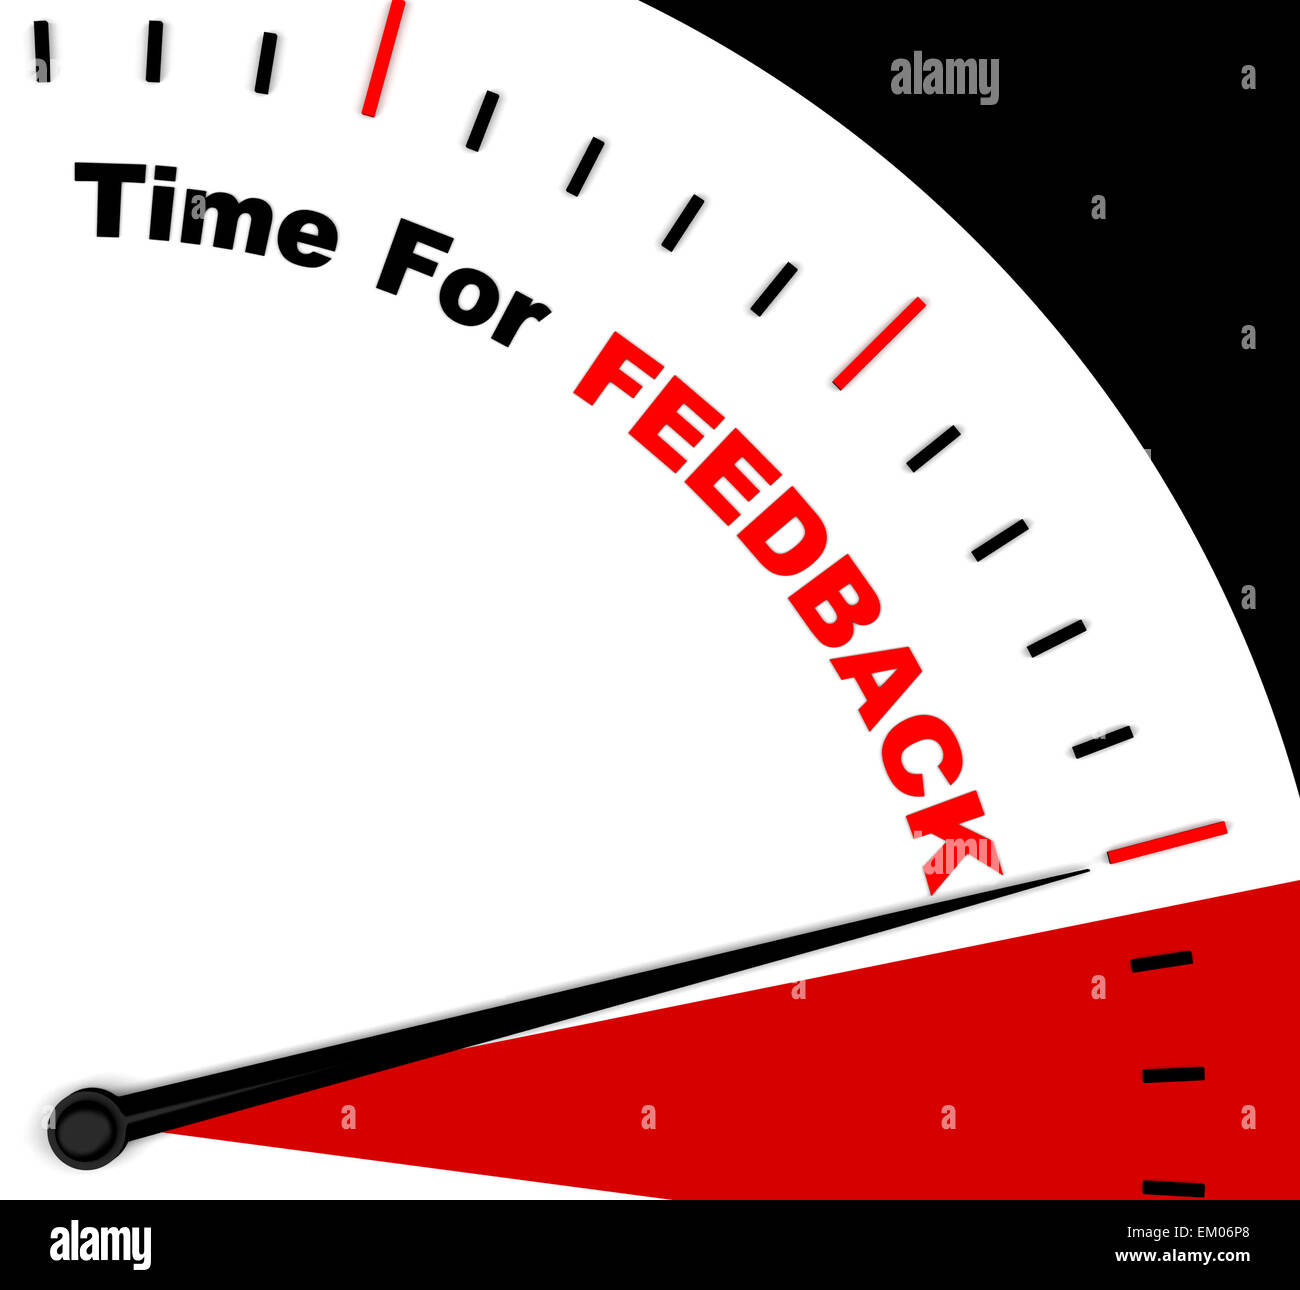 Time For feedback Representing Opinion Evaluation And Surveys Stock Photo